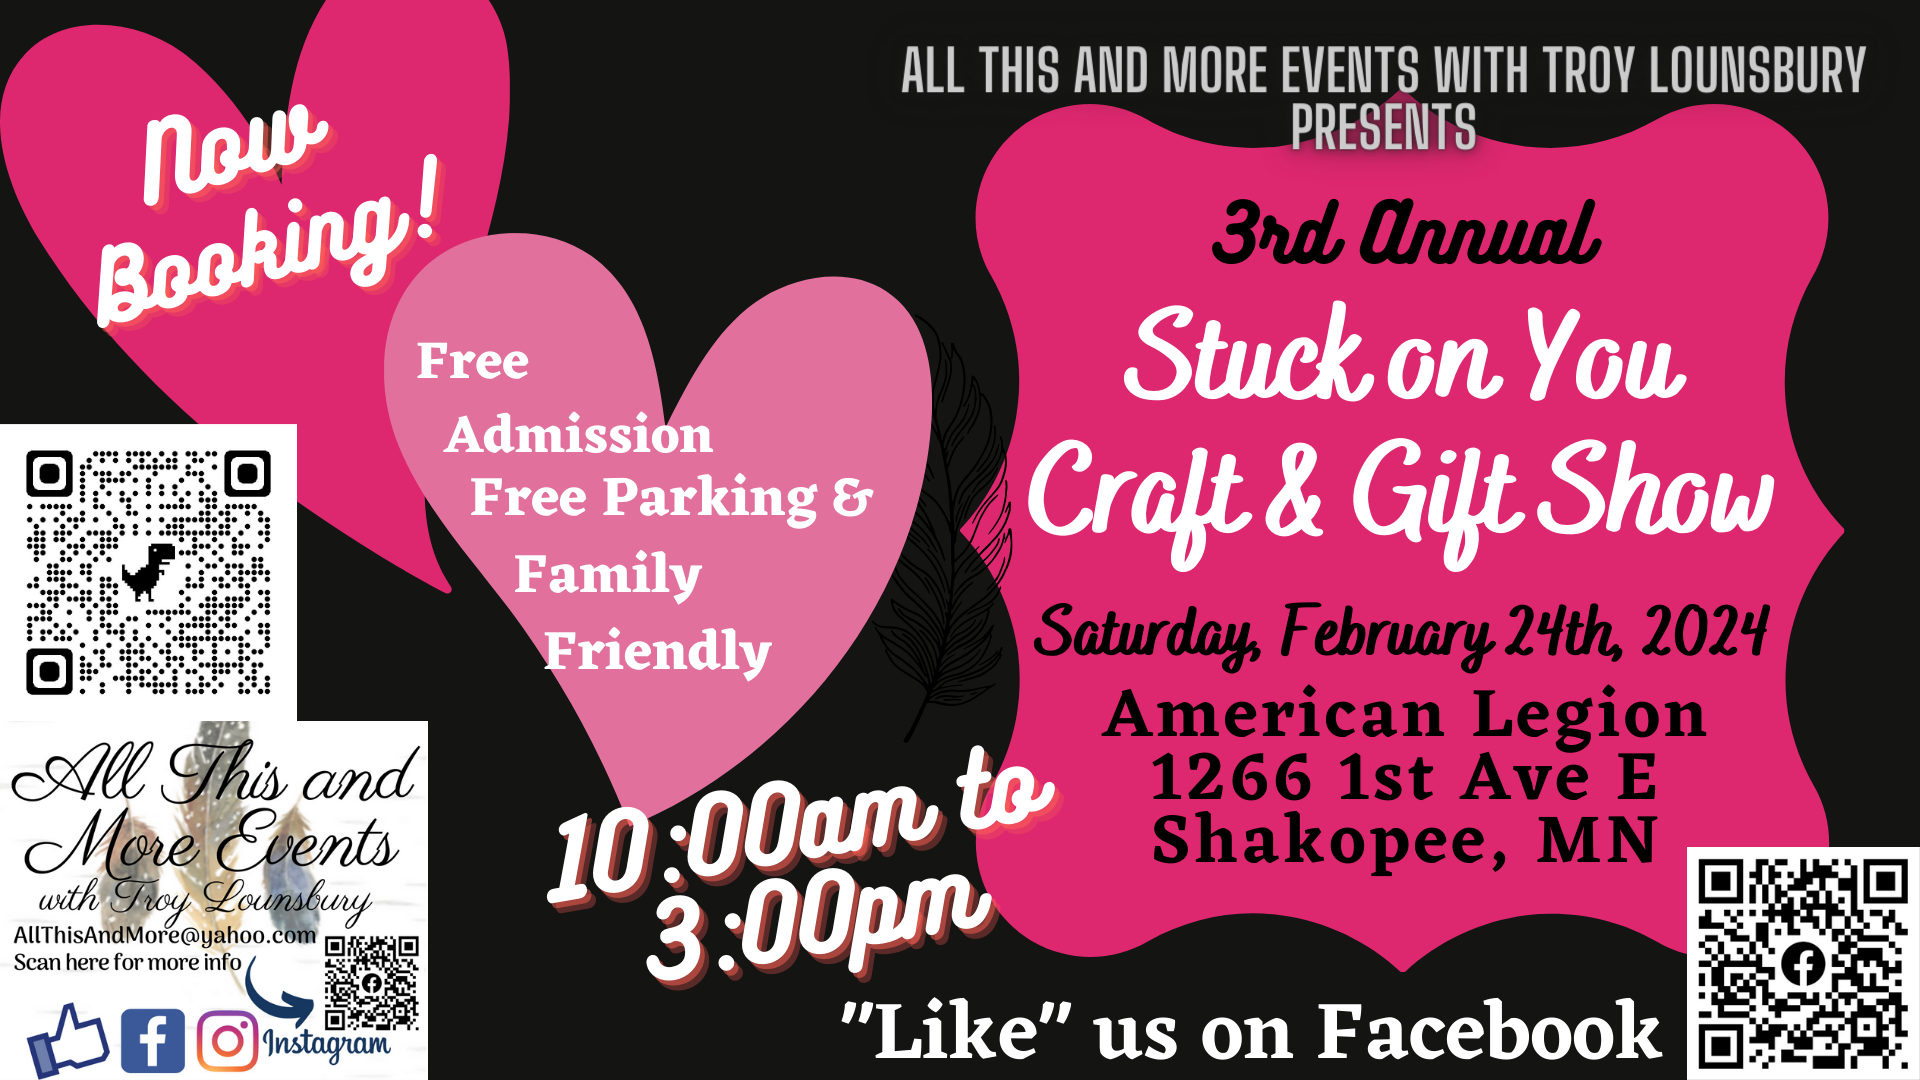 3rd Annual Stuck on You Craft & Gift Show